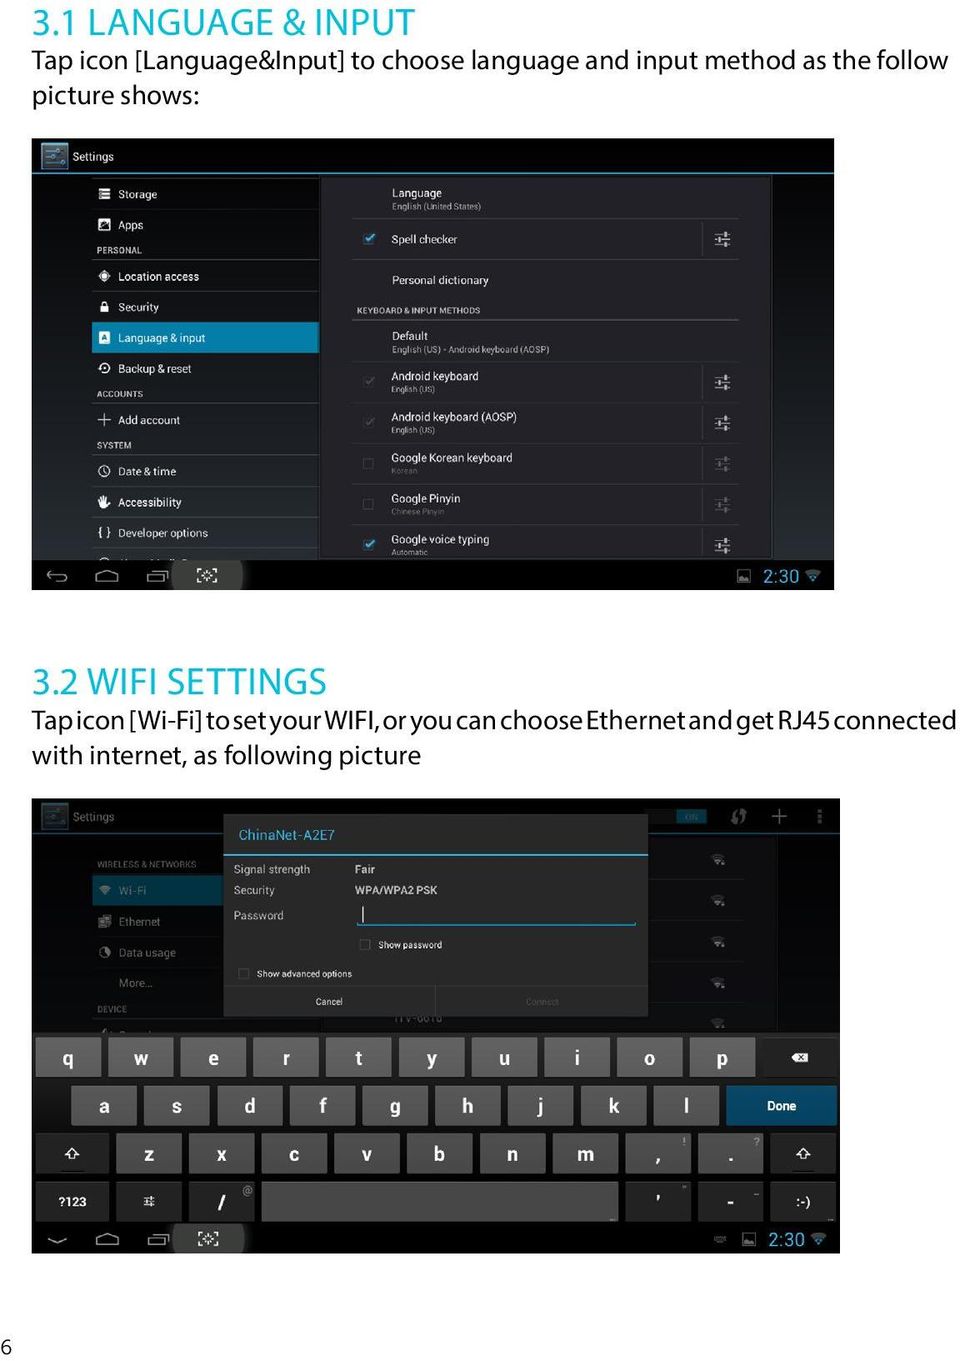 2 WIFI SETTINGS Tap icon [Wi-Fi] to set your WIFI, or you can